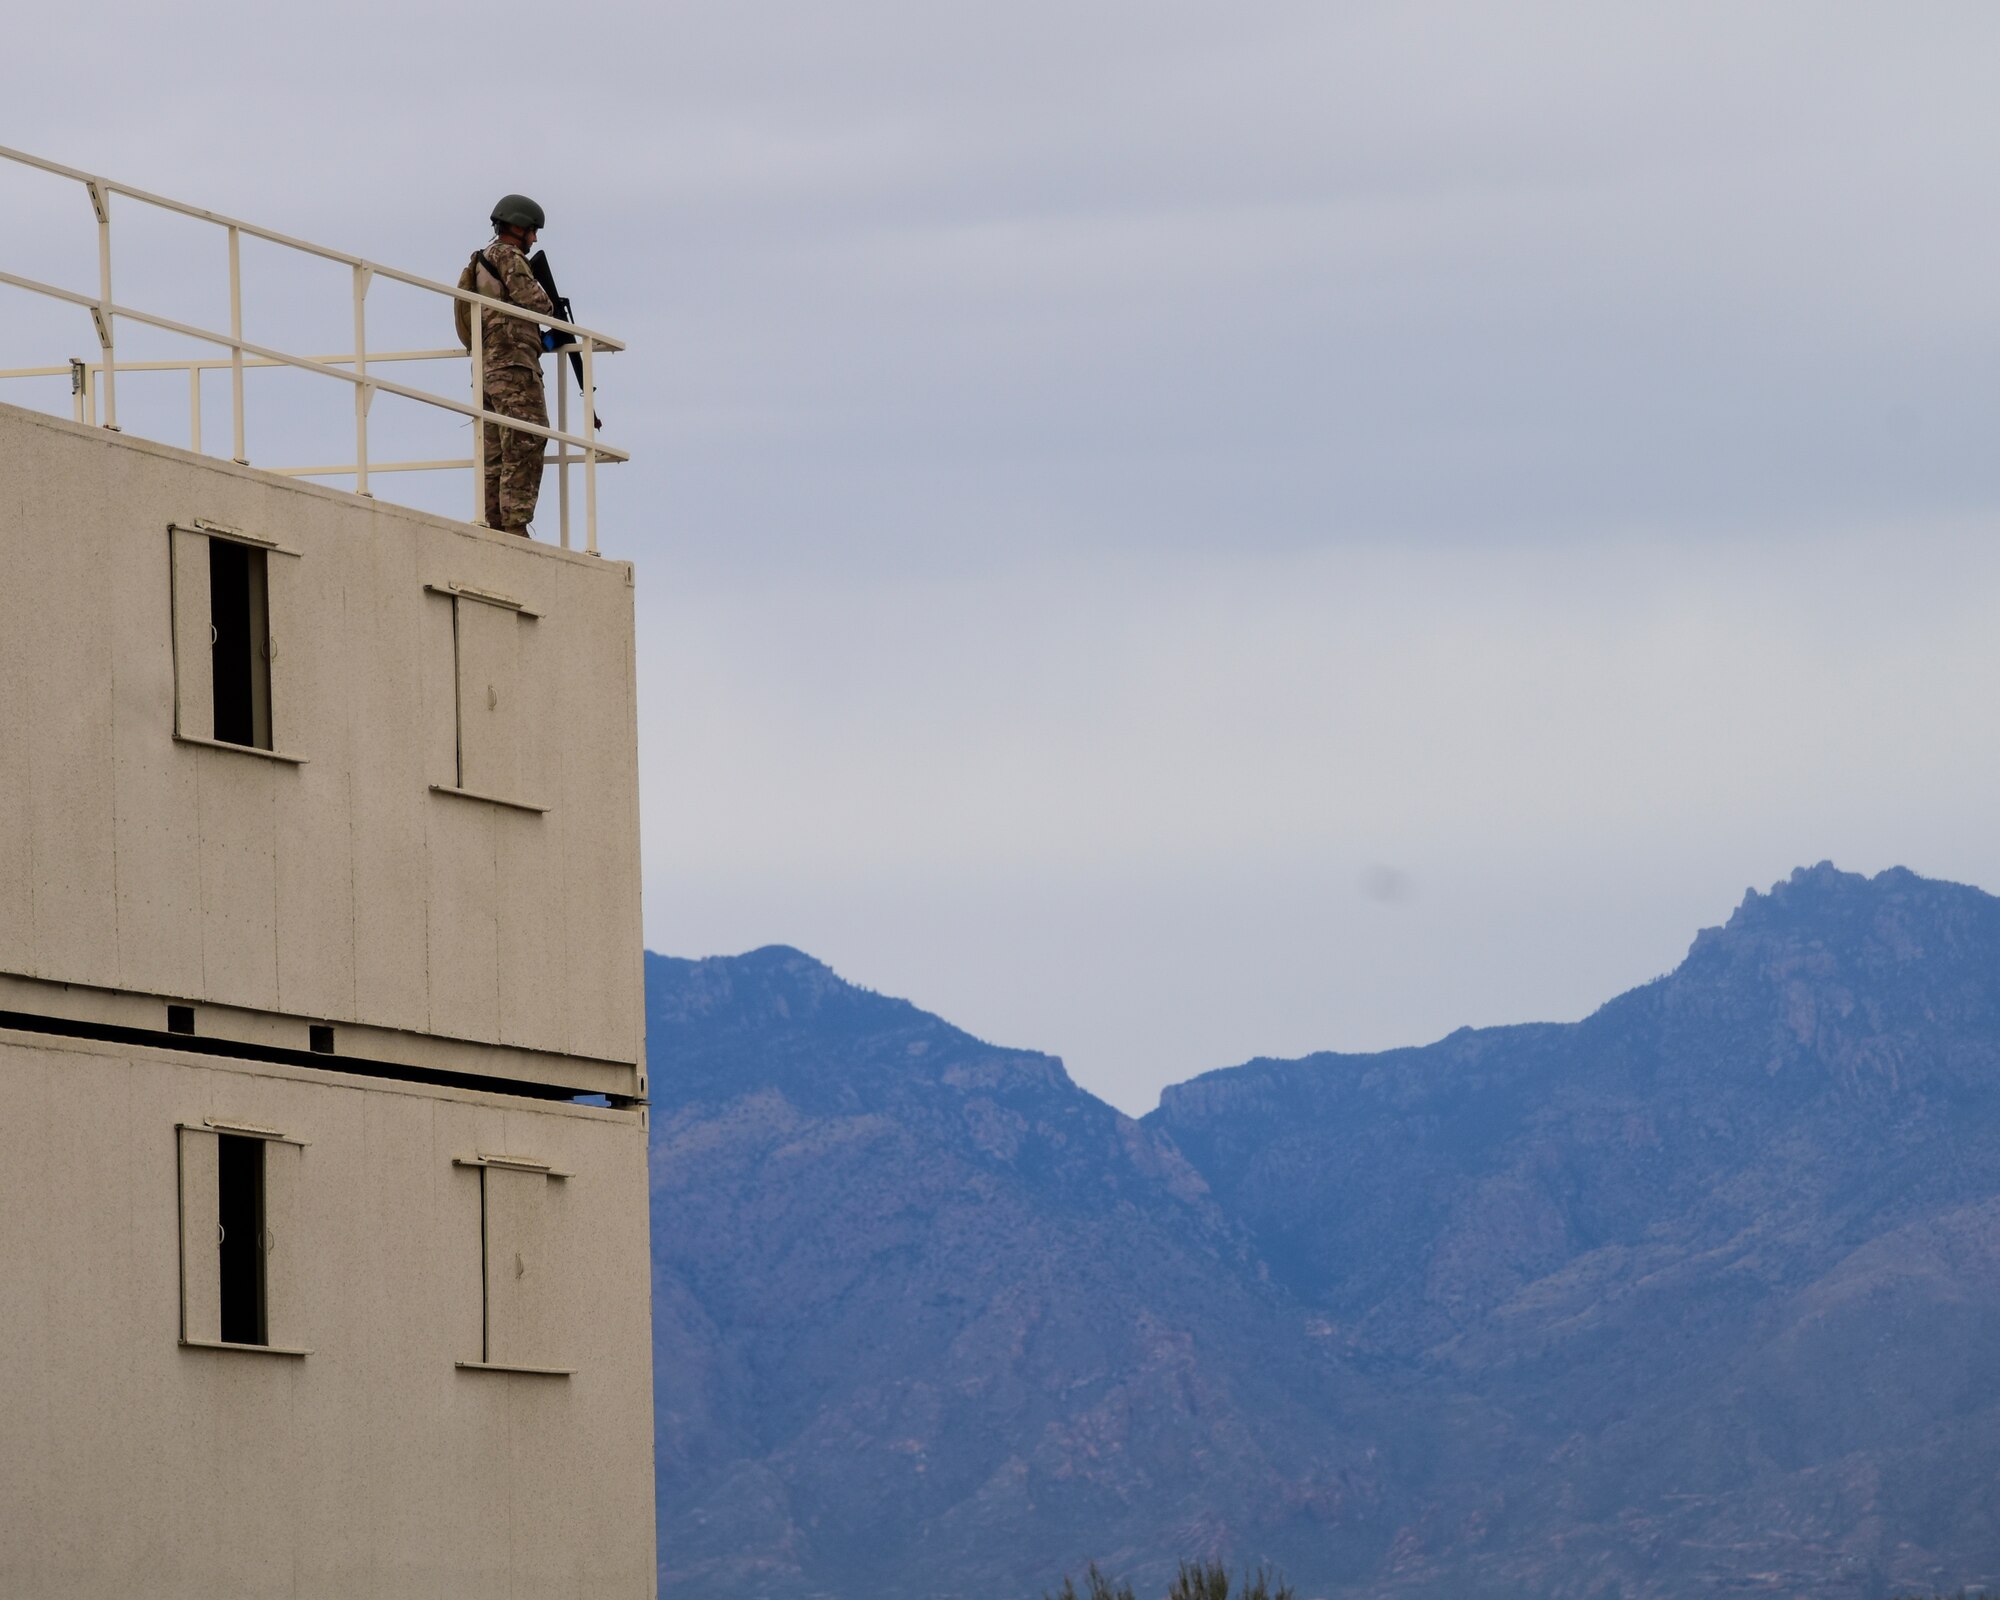 Airman stands guard during training exercise